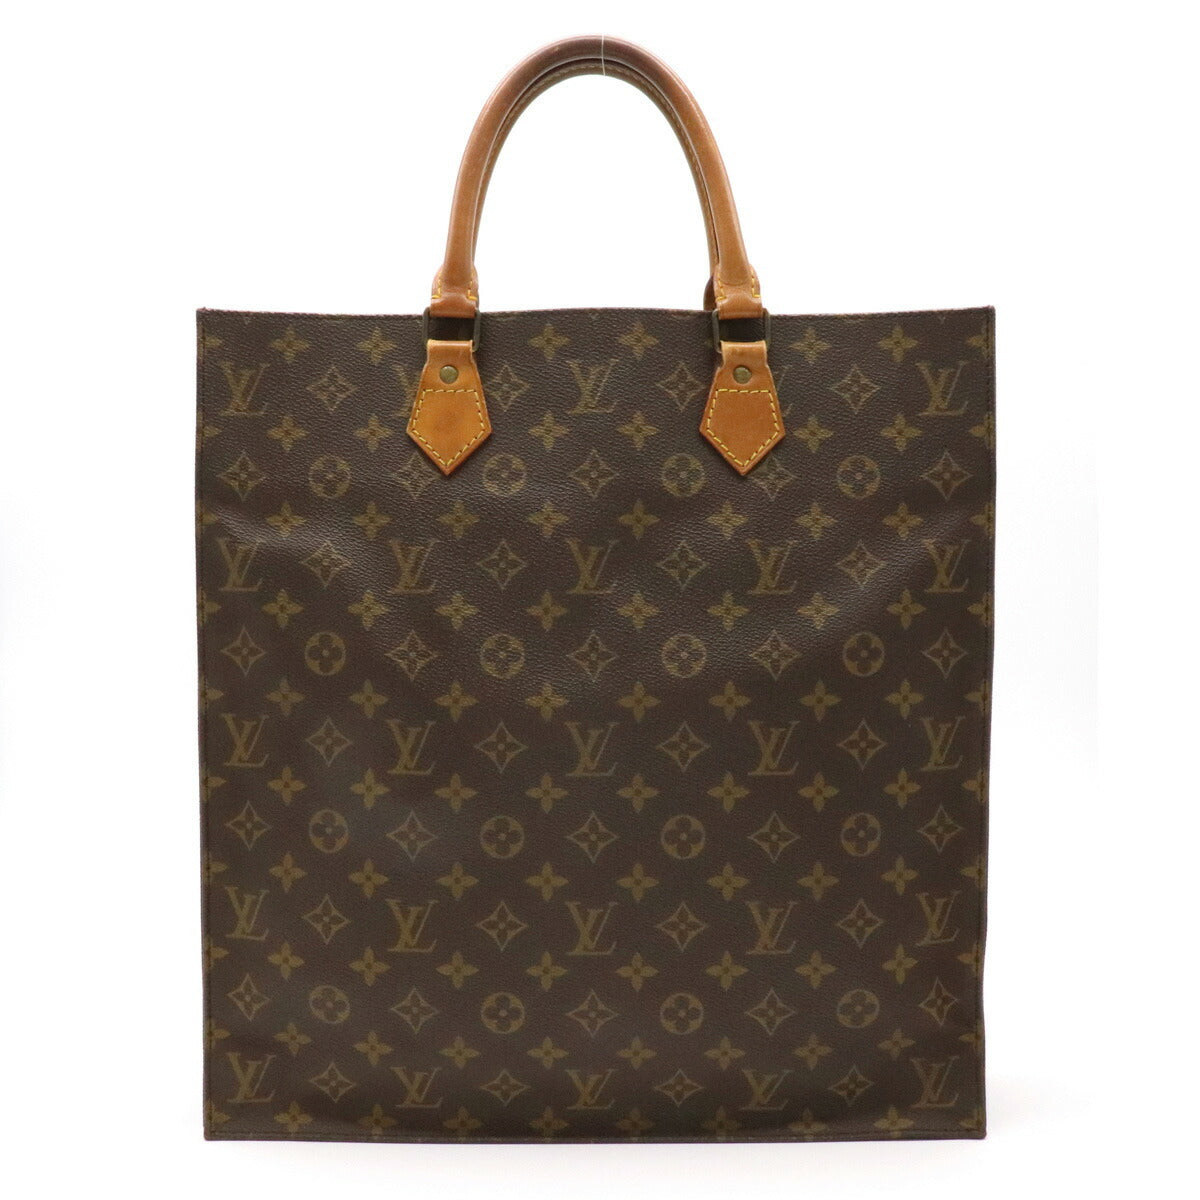 Excited to add the LV Sac Plat PM to my Louis Vuitton Collection! Check out  what fits in my bag! 